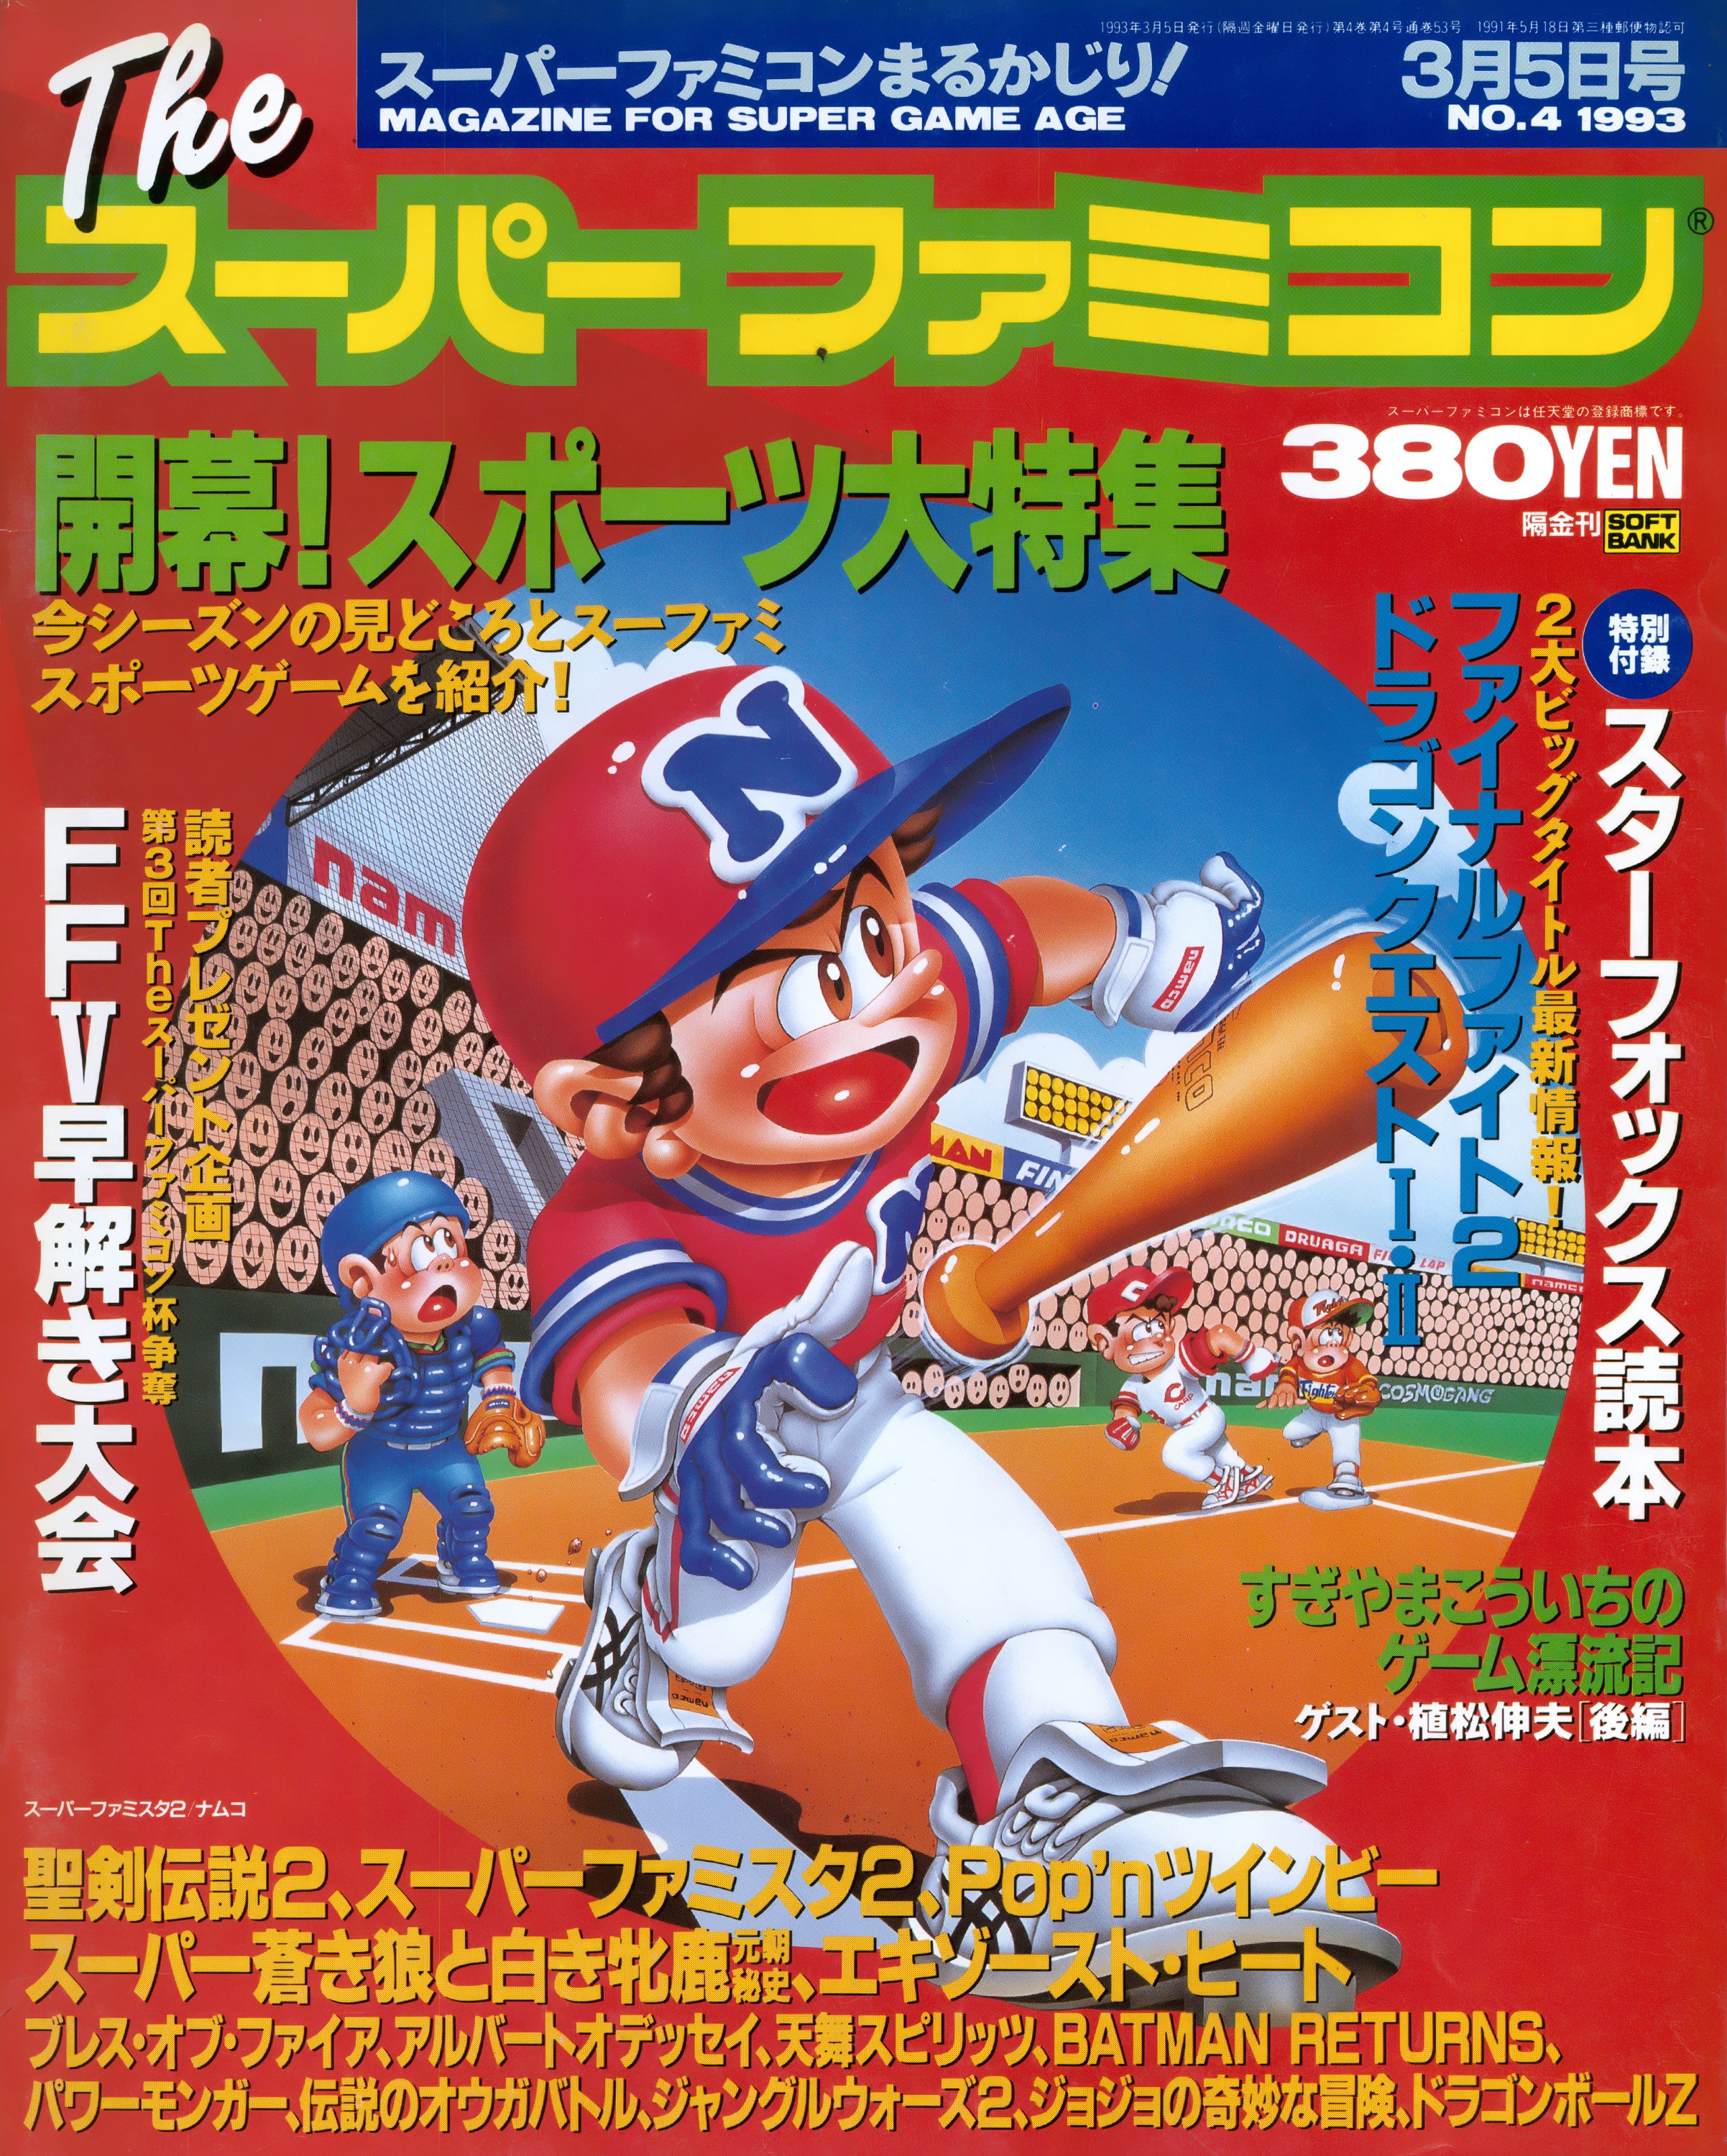 More information about "The Super Famicom Vol.4 No.04 (March 05, 1993)"